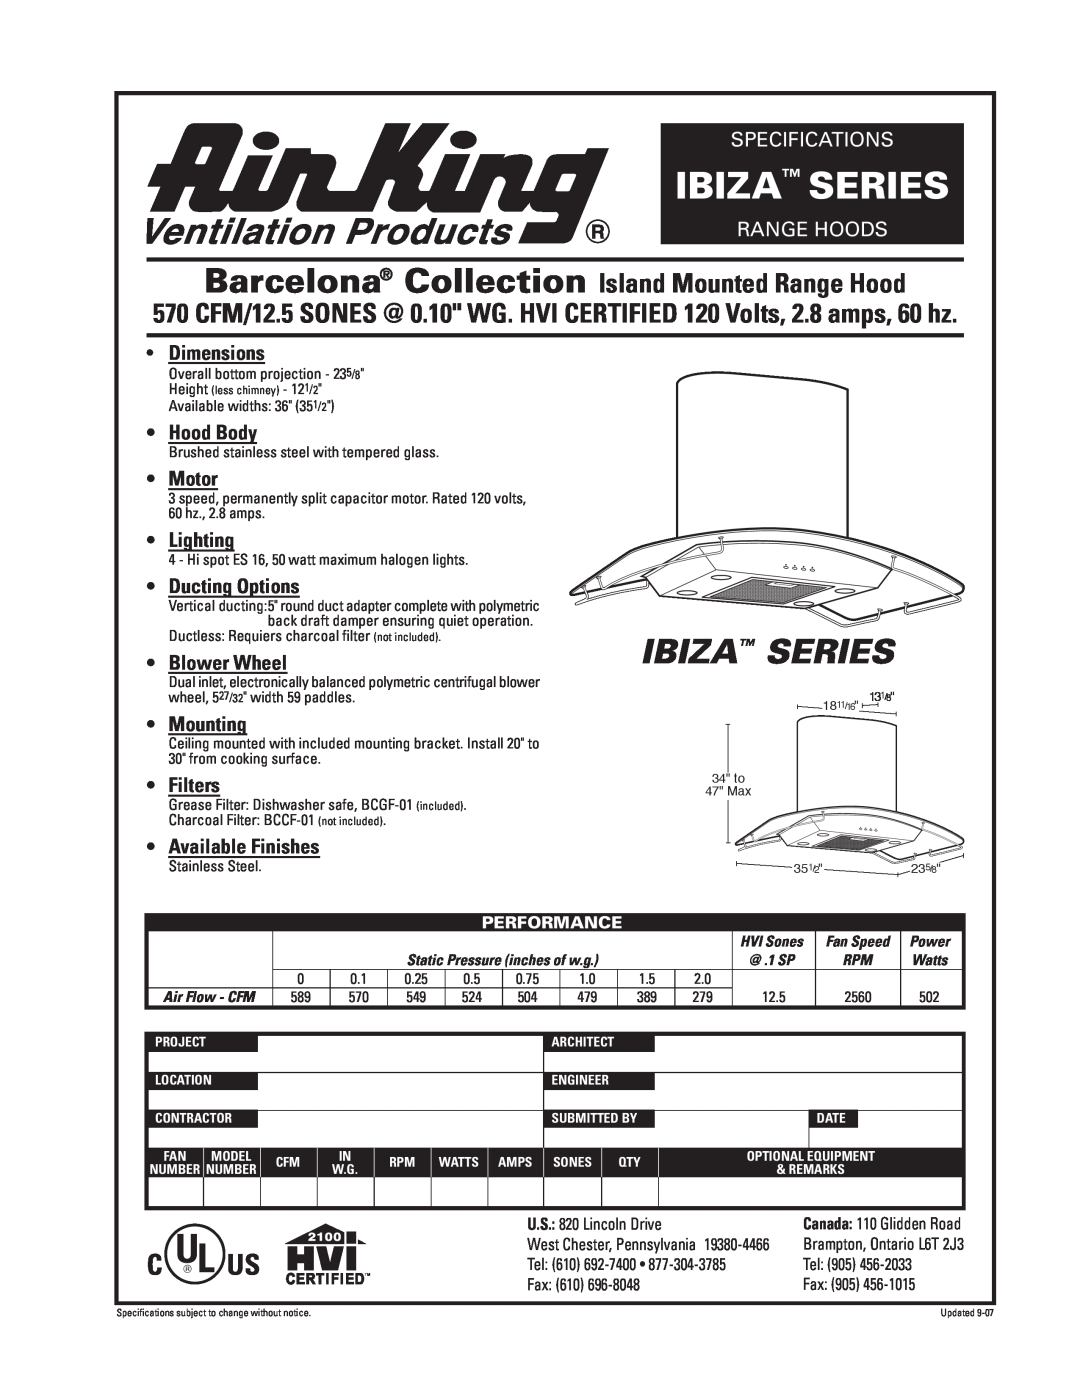 Air King IBIZA SERIES specifications Ibiza Series, Barcelona Collection Island Mounted Range Hood, Specifications, Motor 